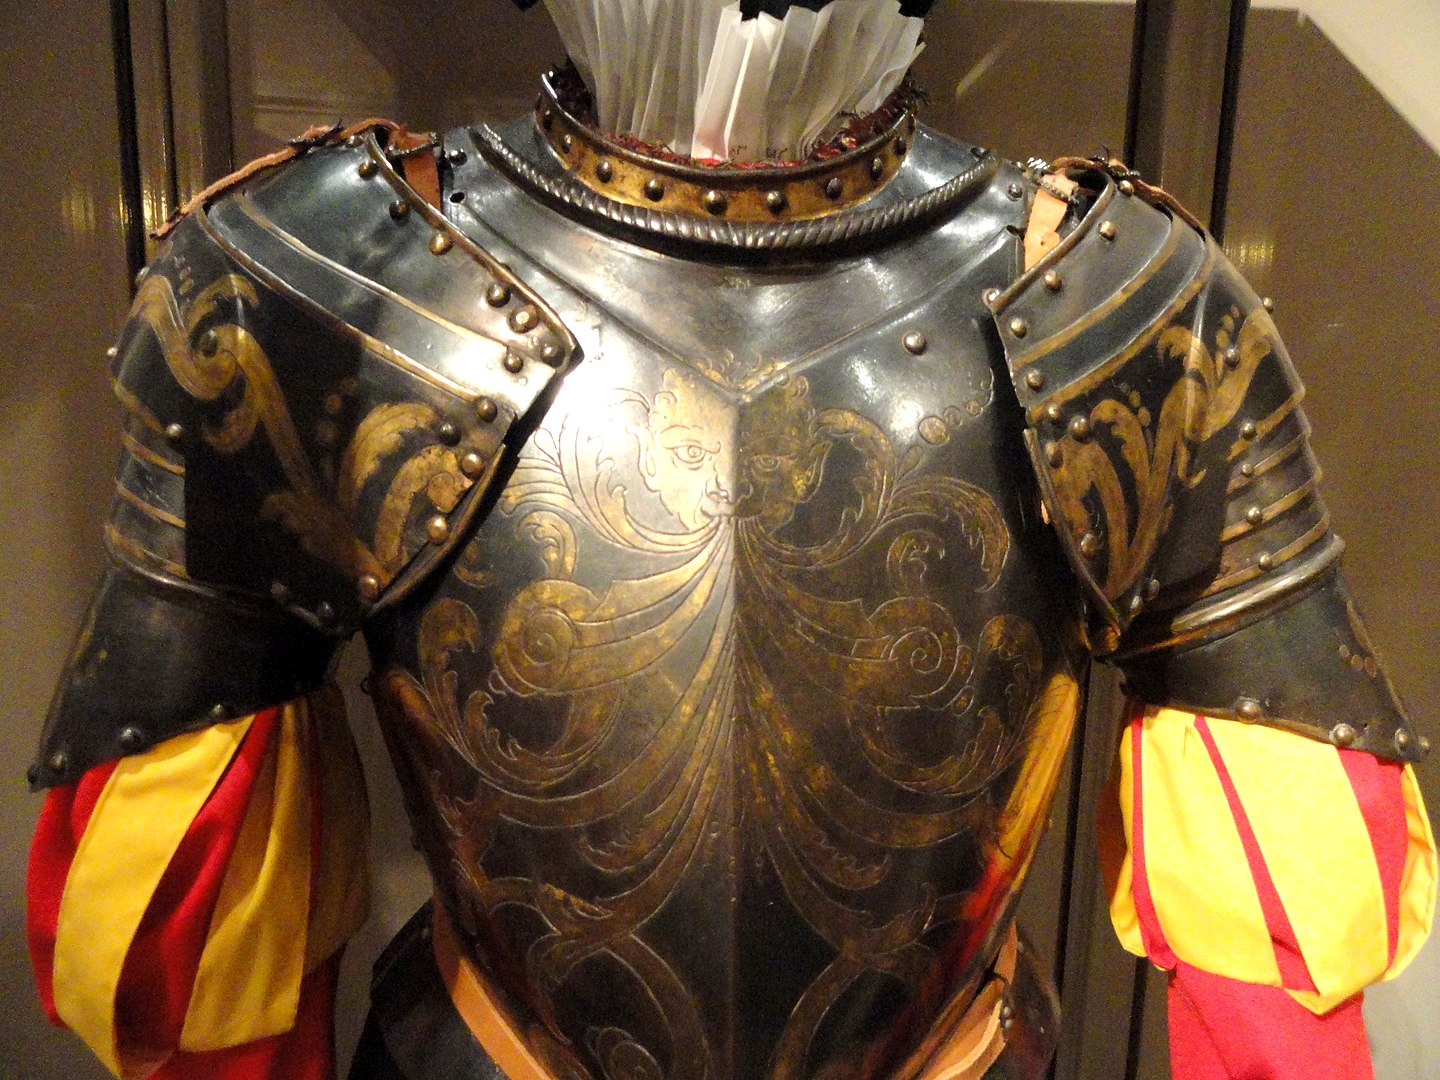 Armour for the Papal Guard of Gregory XIII, c. 1580s (Higgins Armory Museum)